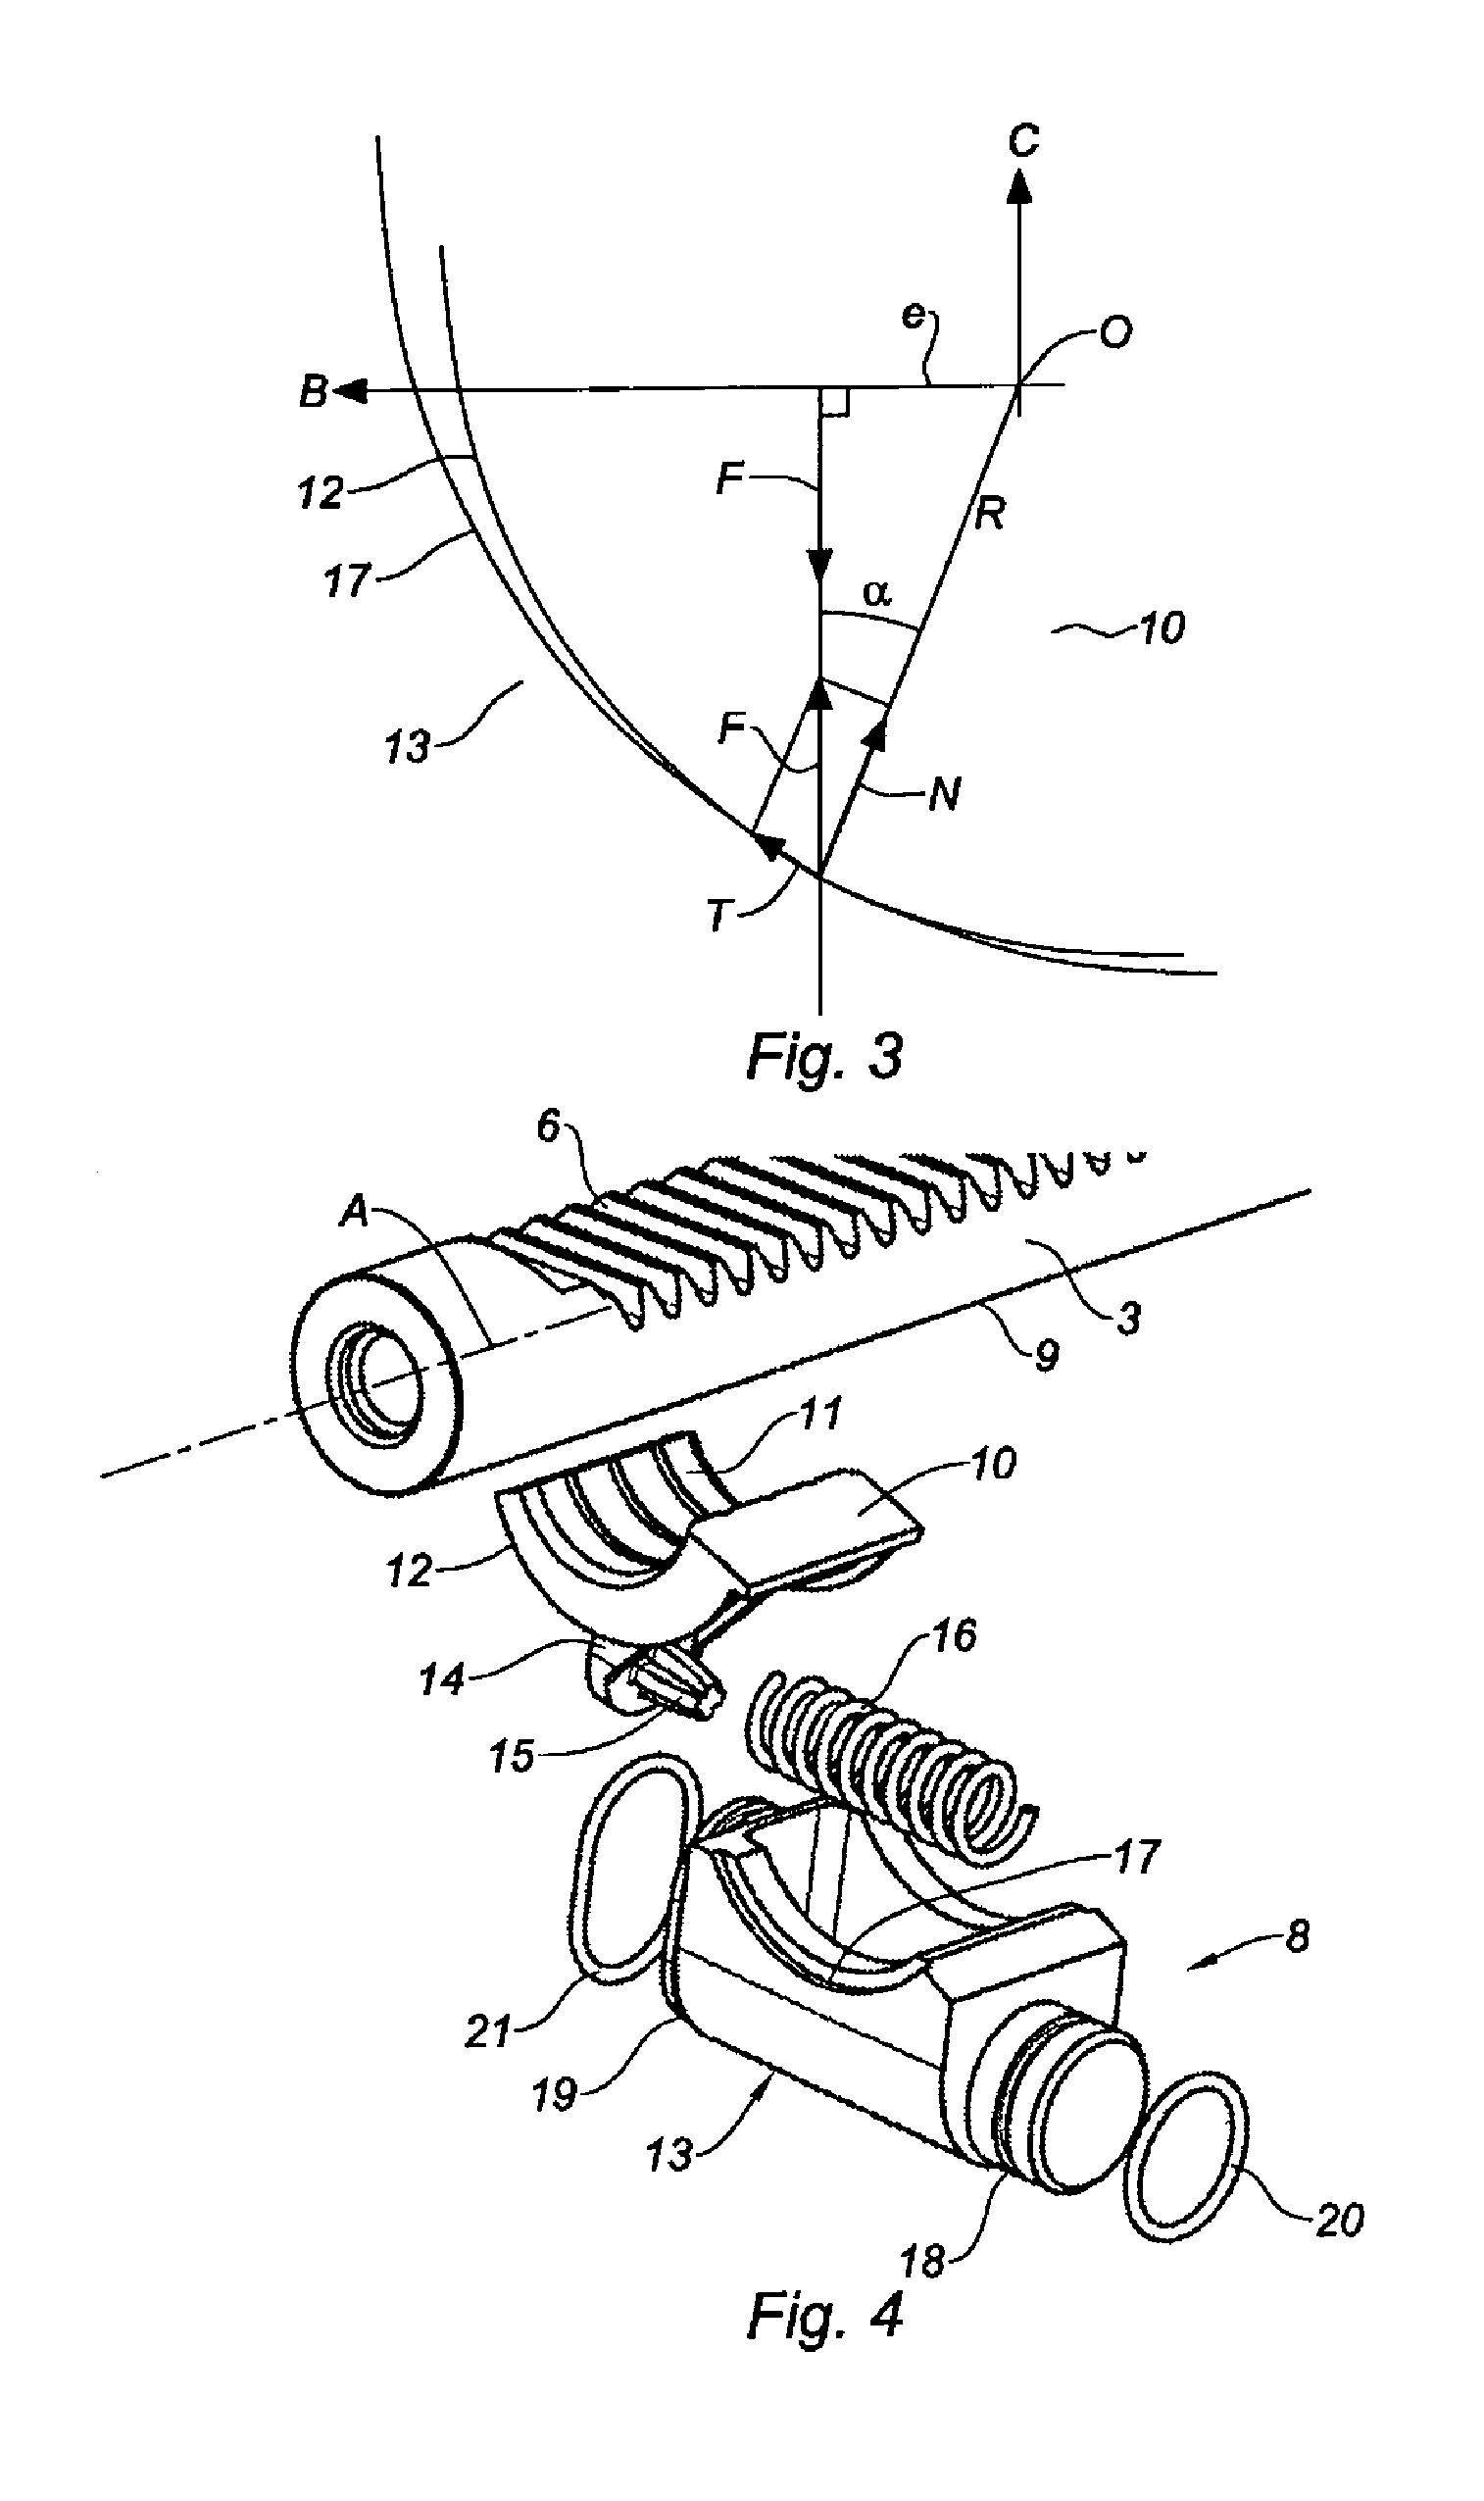 Off-centred pusher device for steering an automobile